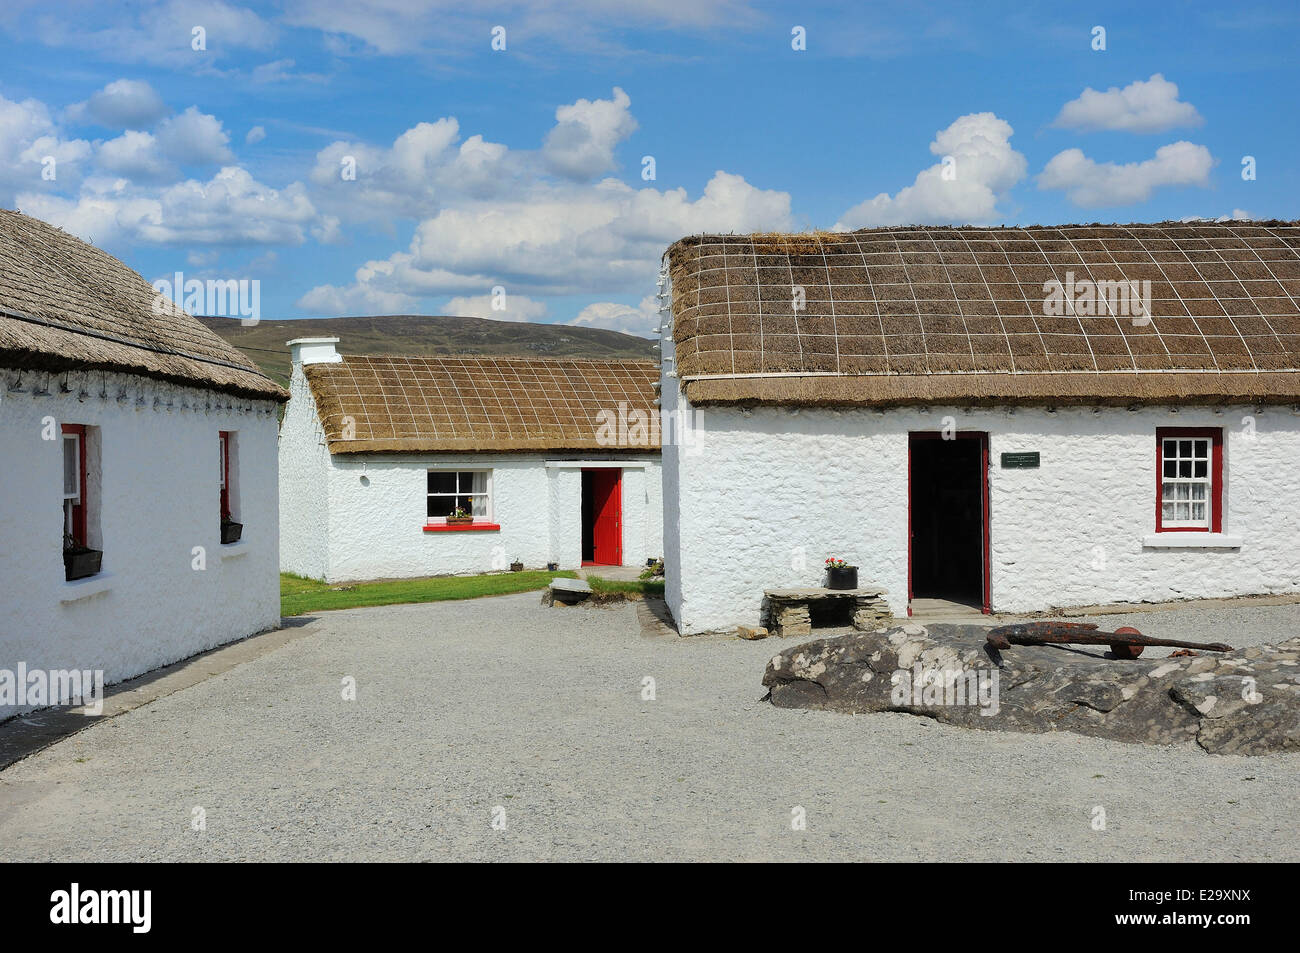 Ireland, County Donegal, Glencolumbkille (Glencolmcille), Folk village museum, Traditional thatched cottages Stock Photo